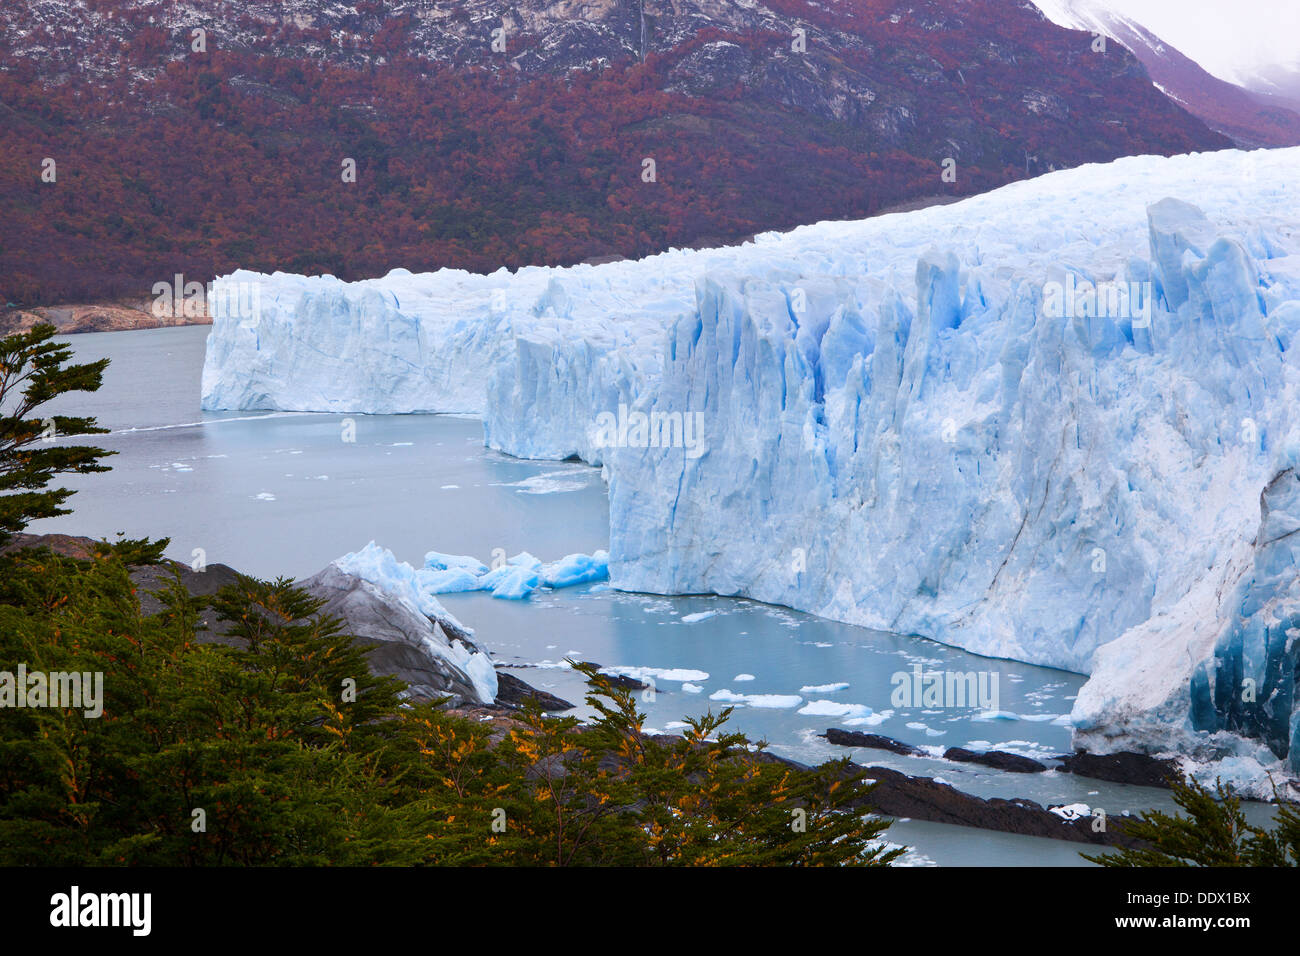 Perito Moreno Glacier, early morning, autumn day, blue ice detail, fallen ice floating in water of Lago Argentino, and fall colo Stock Photo